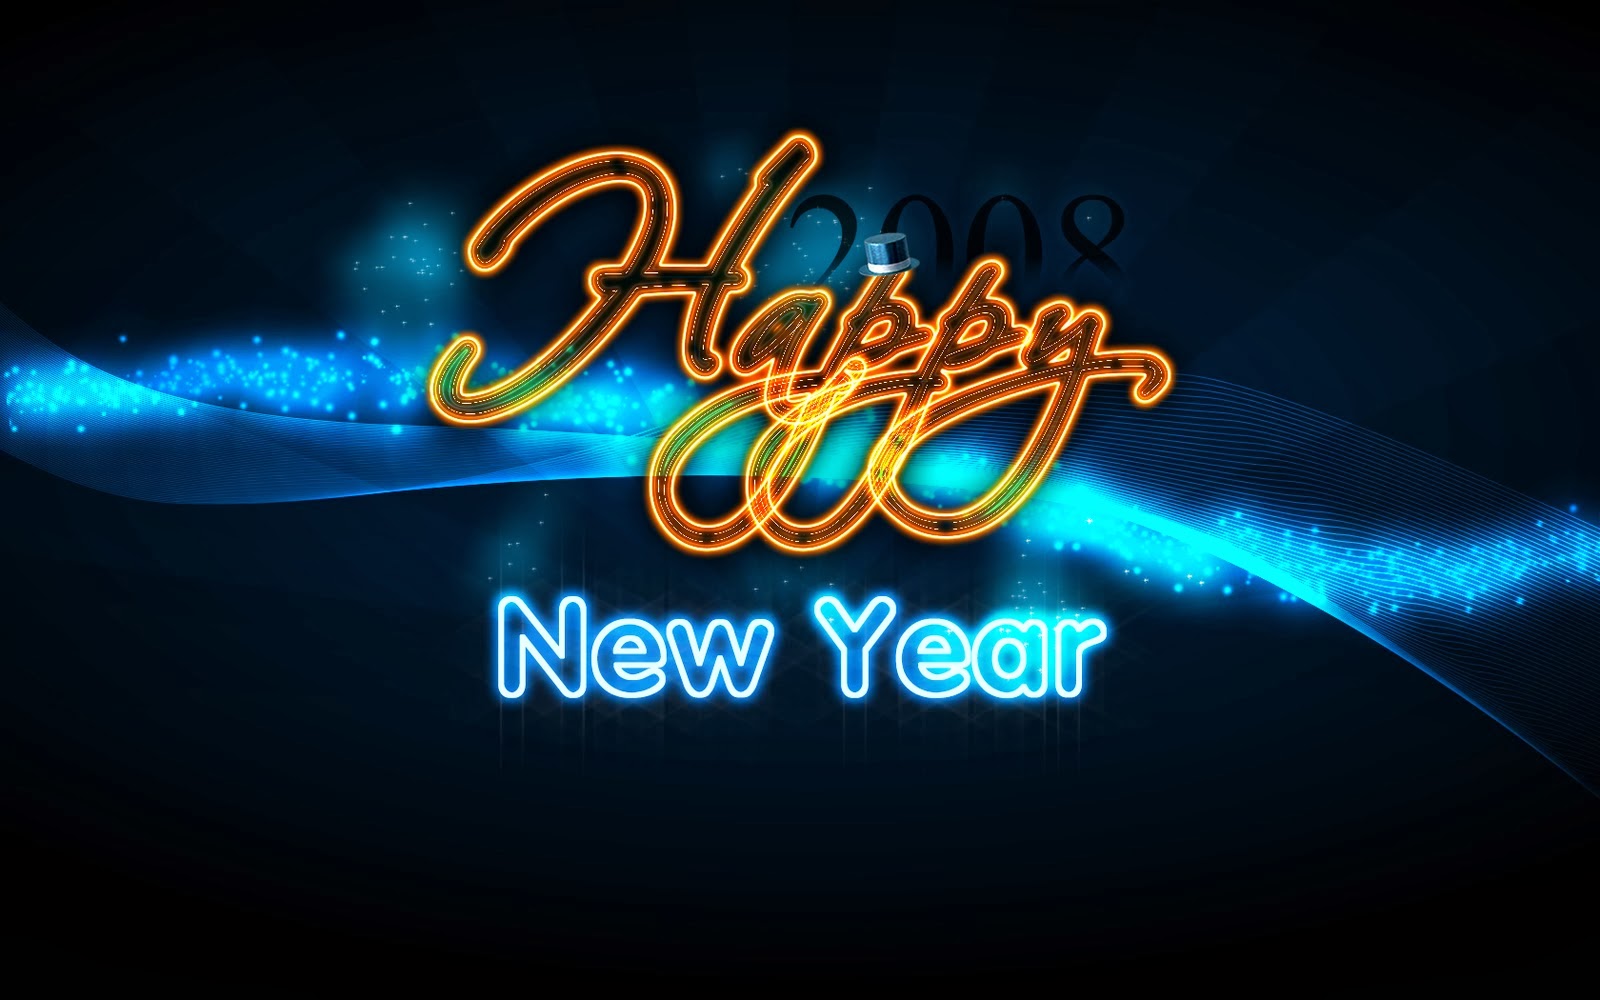 New Year 2014 Wallpapers Beautiful Happy New Year 2014 Wallpapers